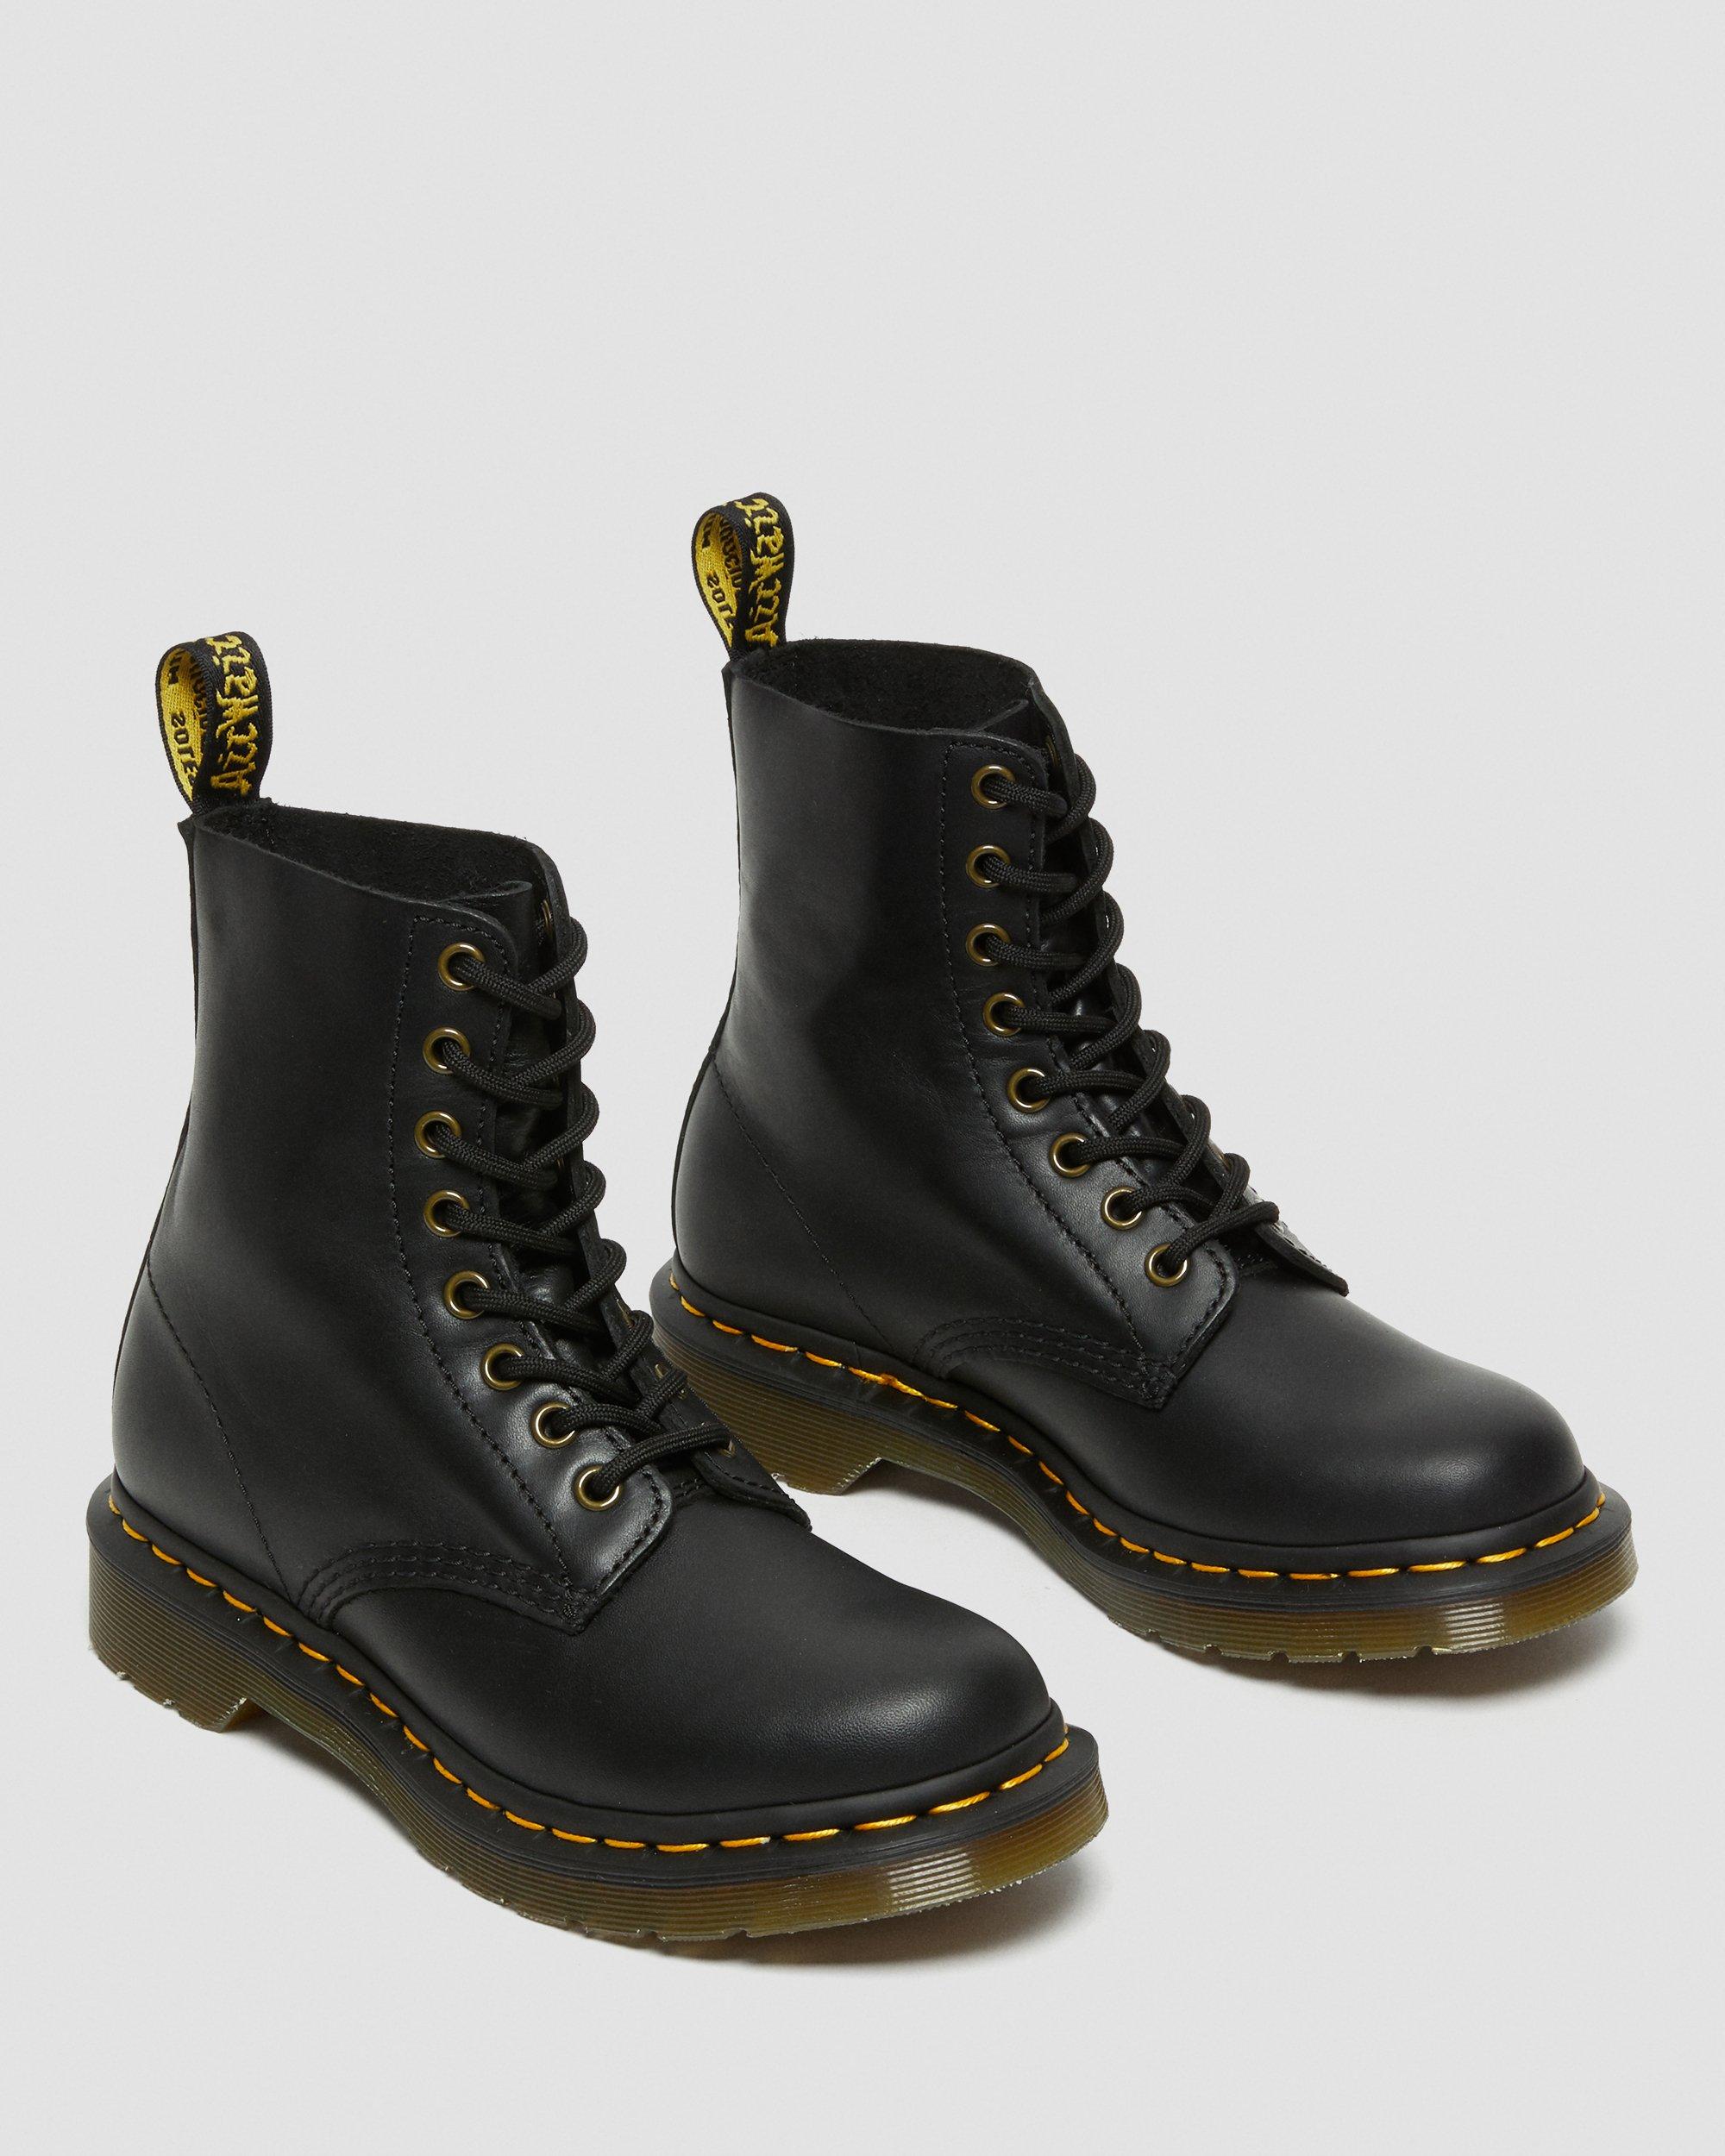 WANAMA LEATHER BOOTS | Dr. Martens